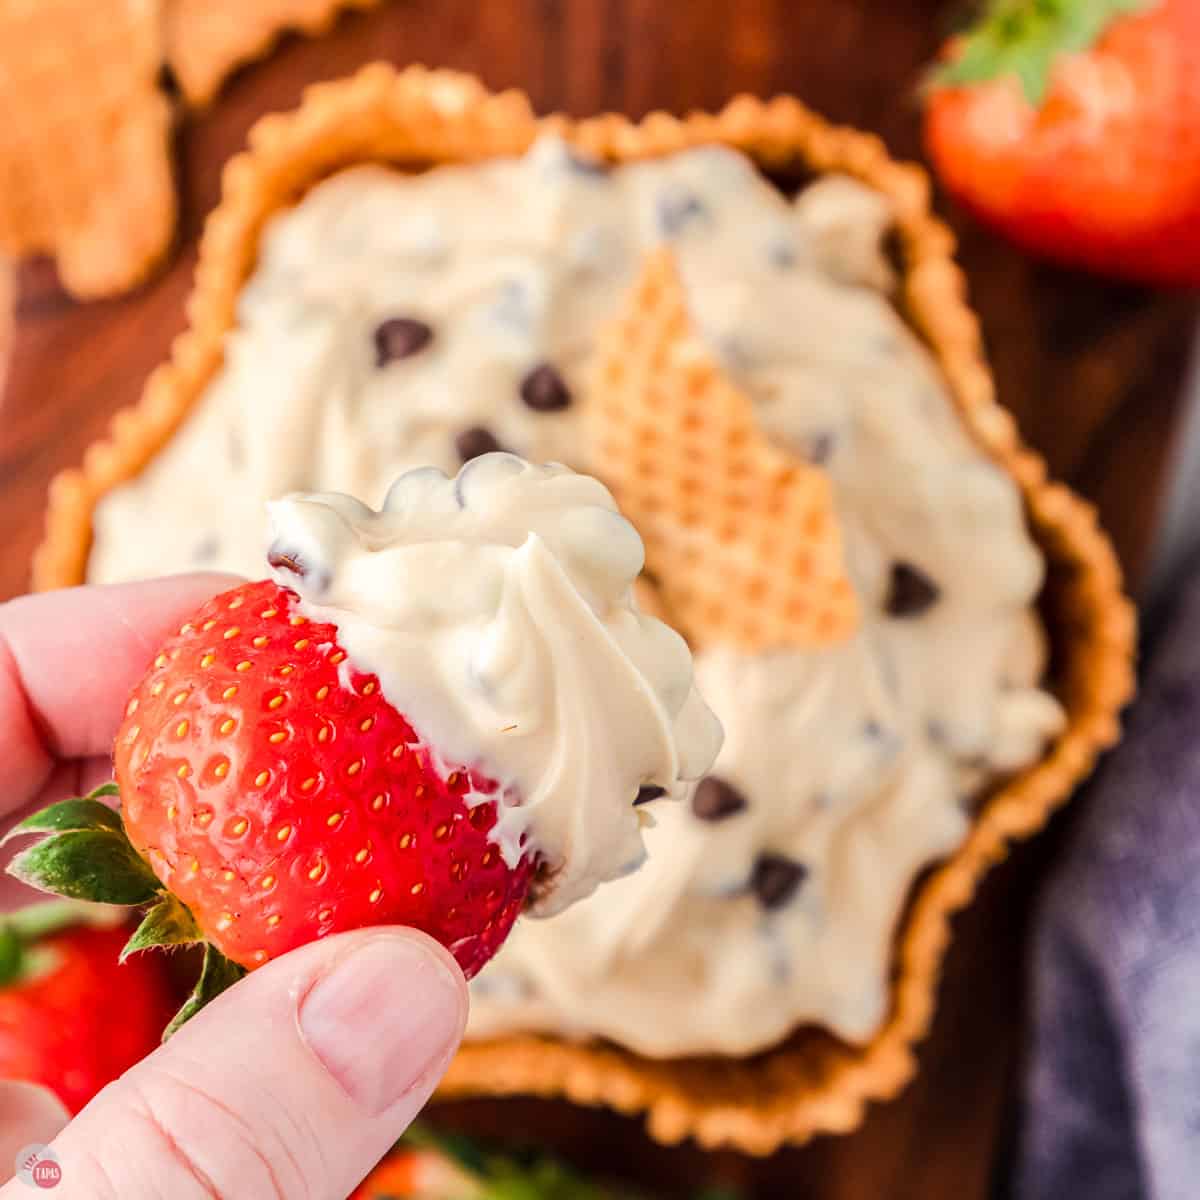 dip strawberries in this cream cheese chocolate chip dip